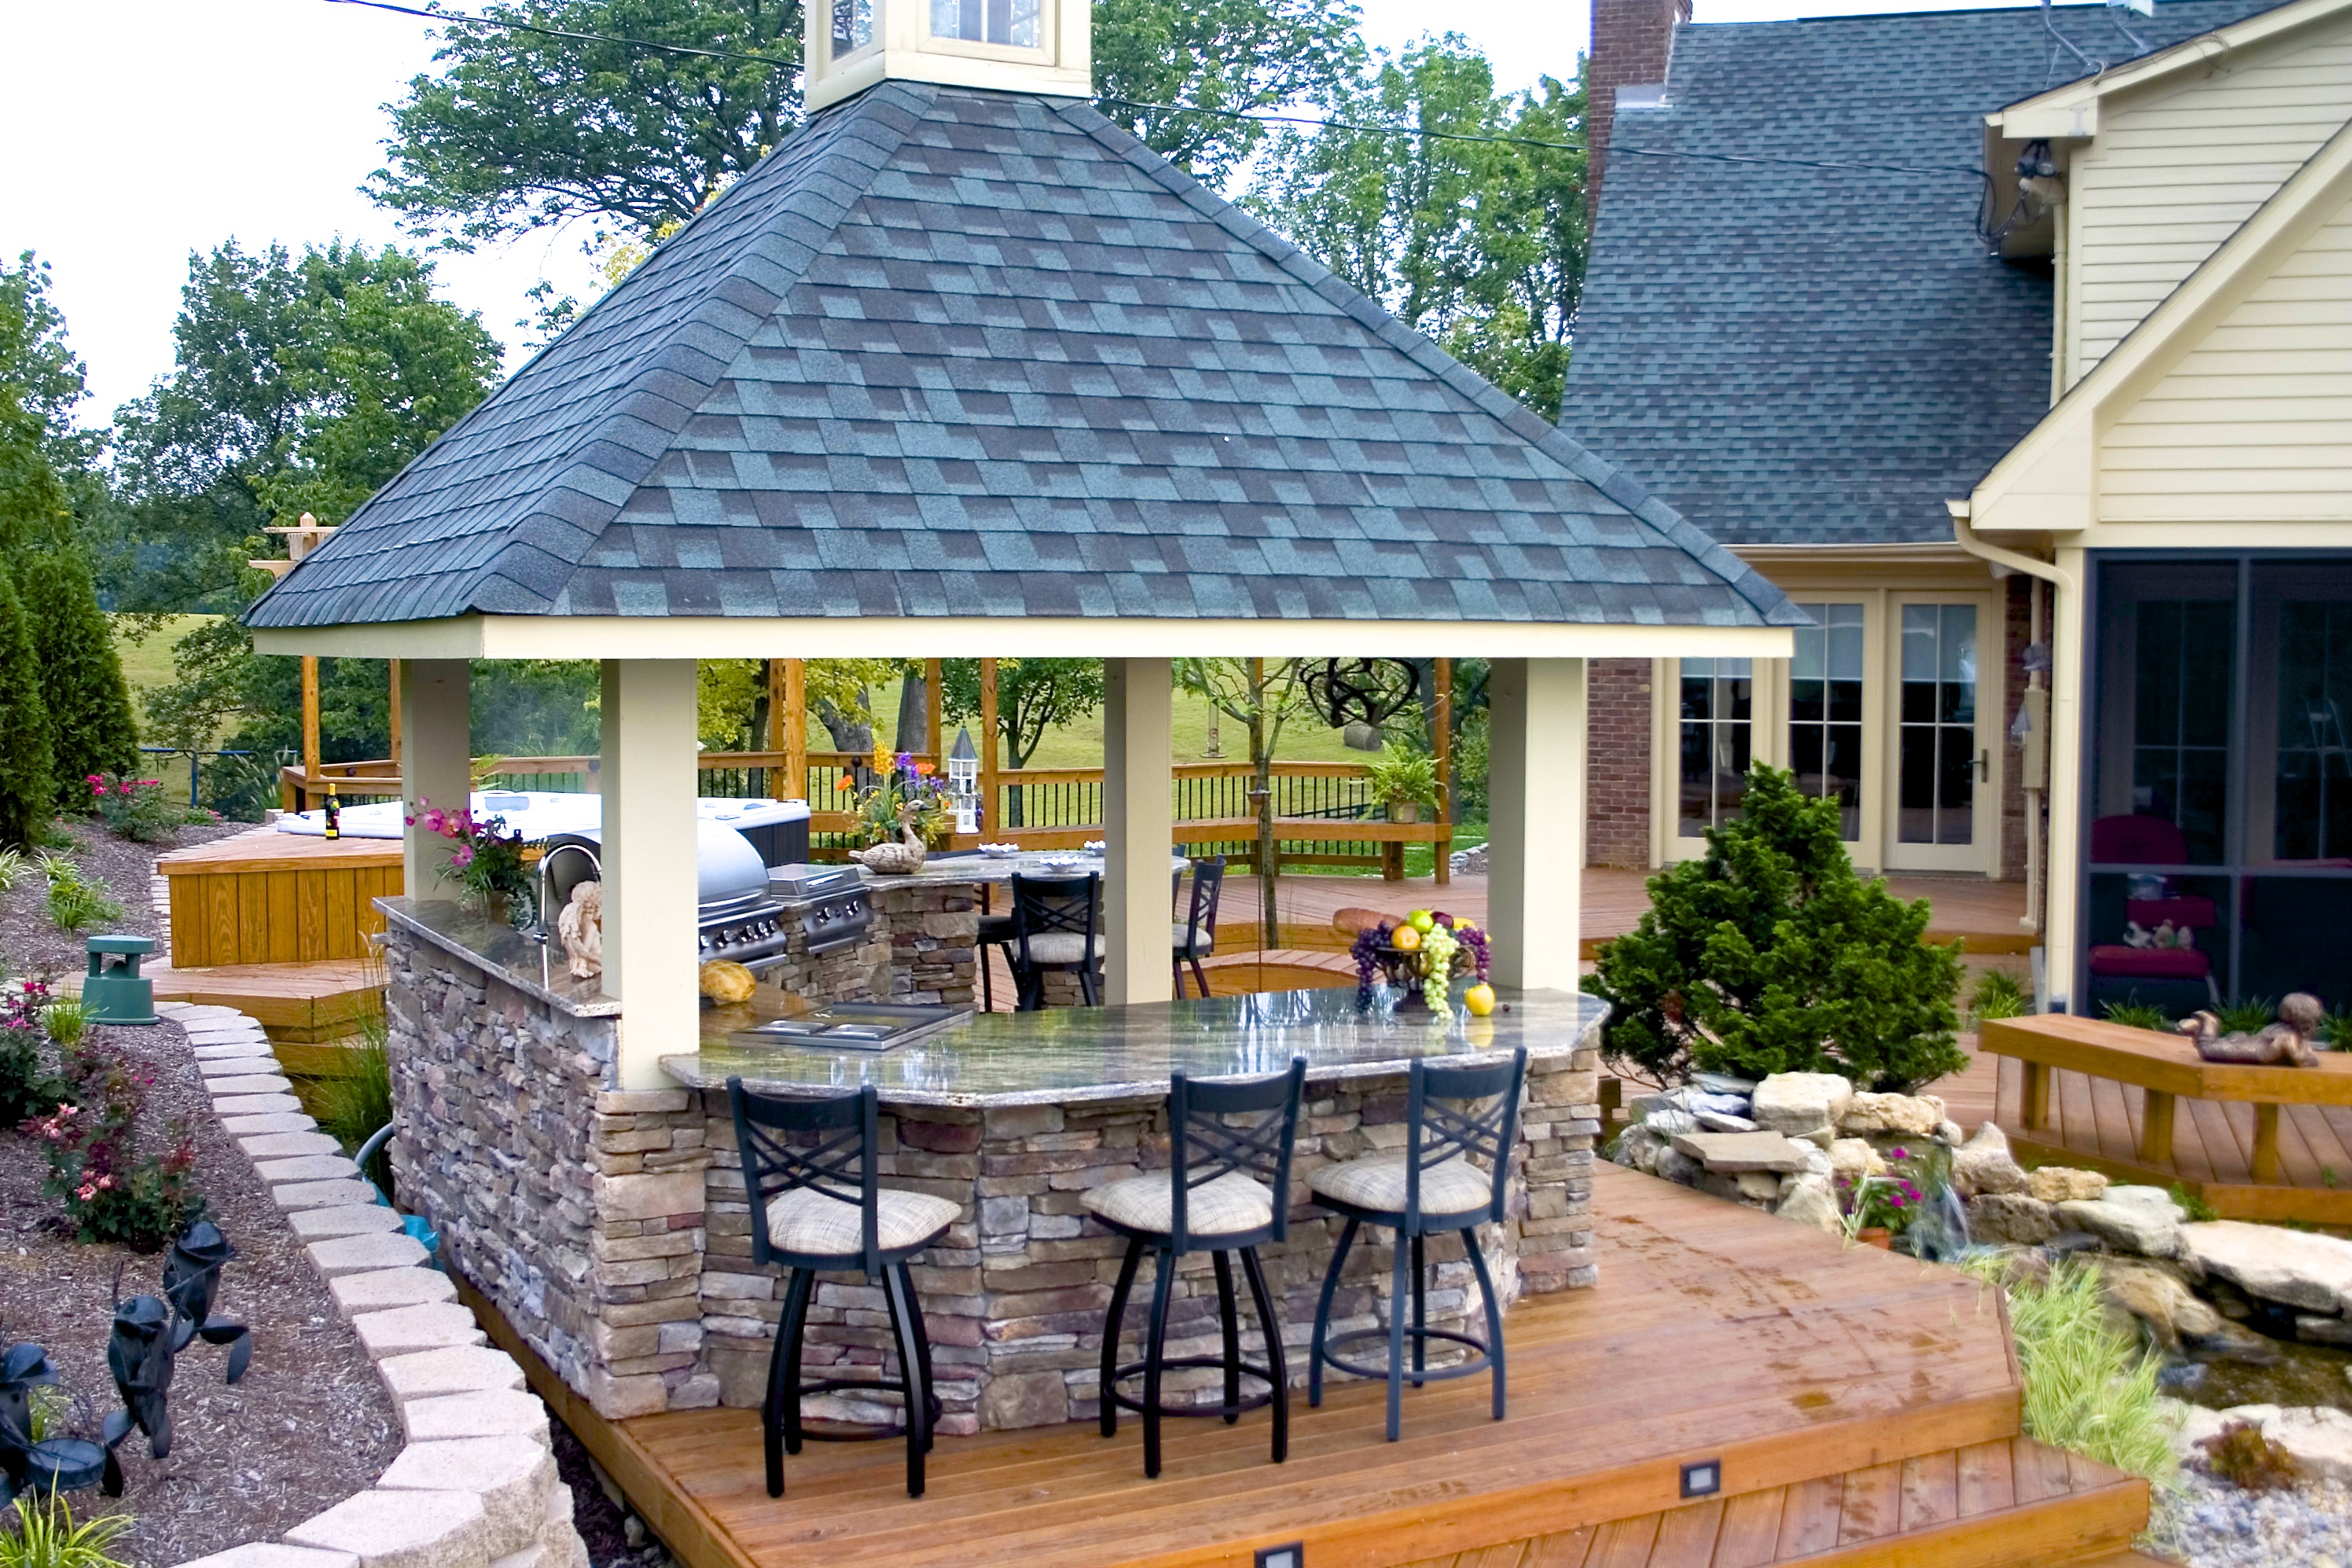 Take your dinner party outside with Outdoor Kitchens!